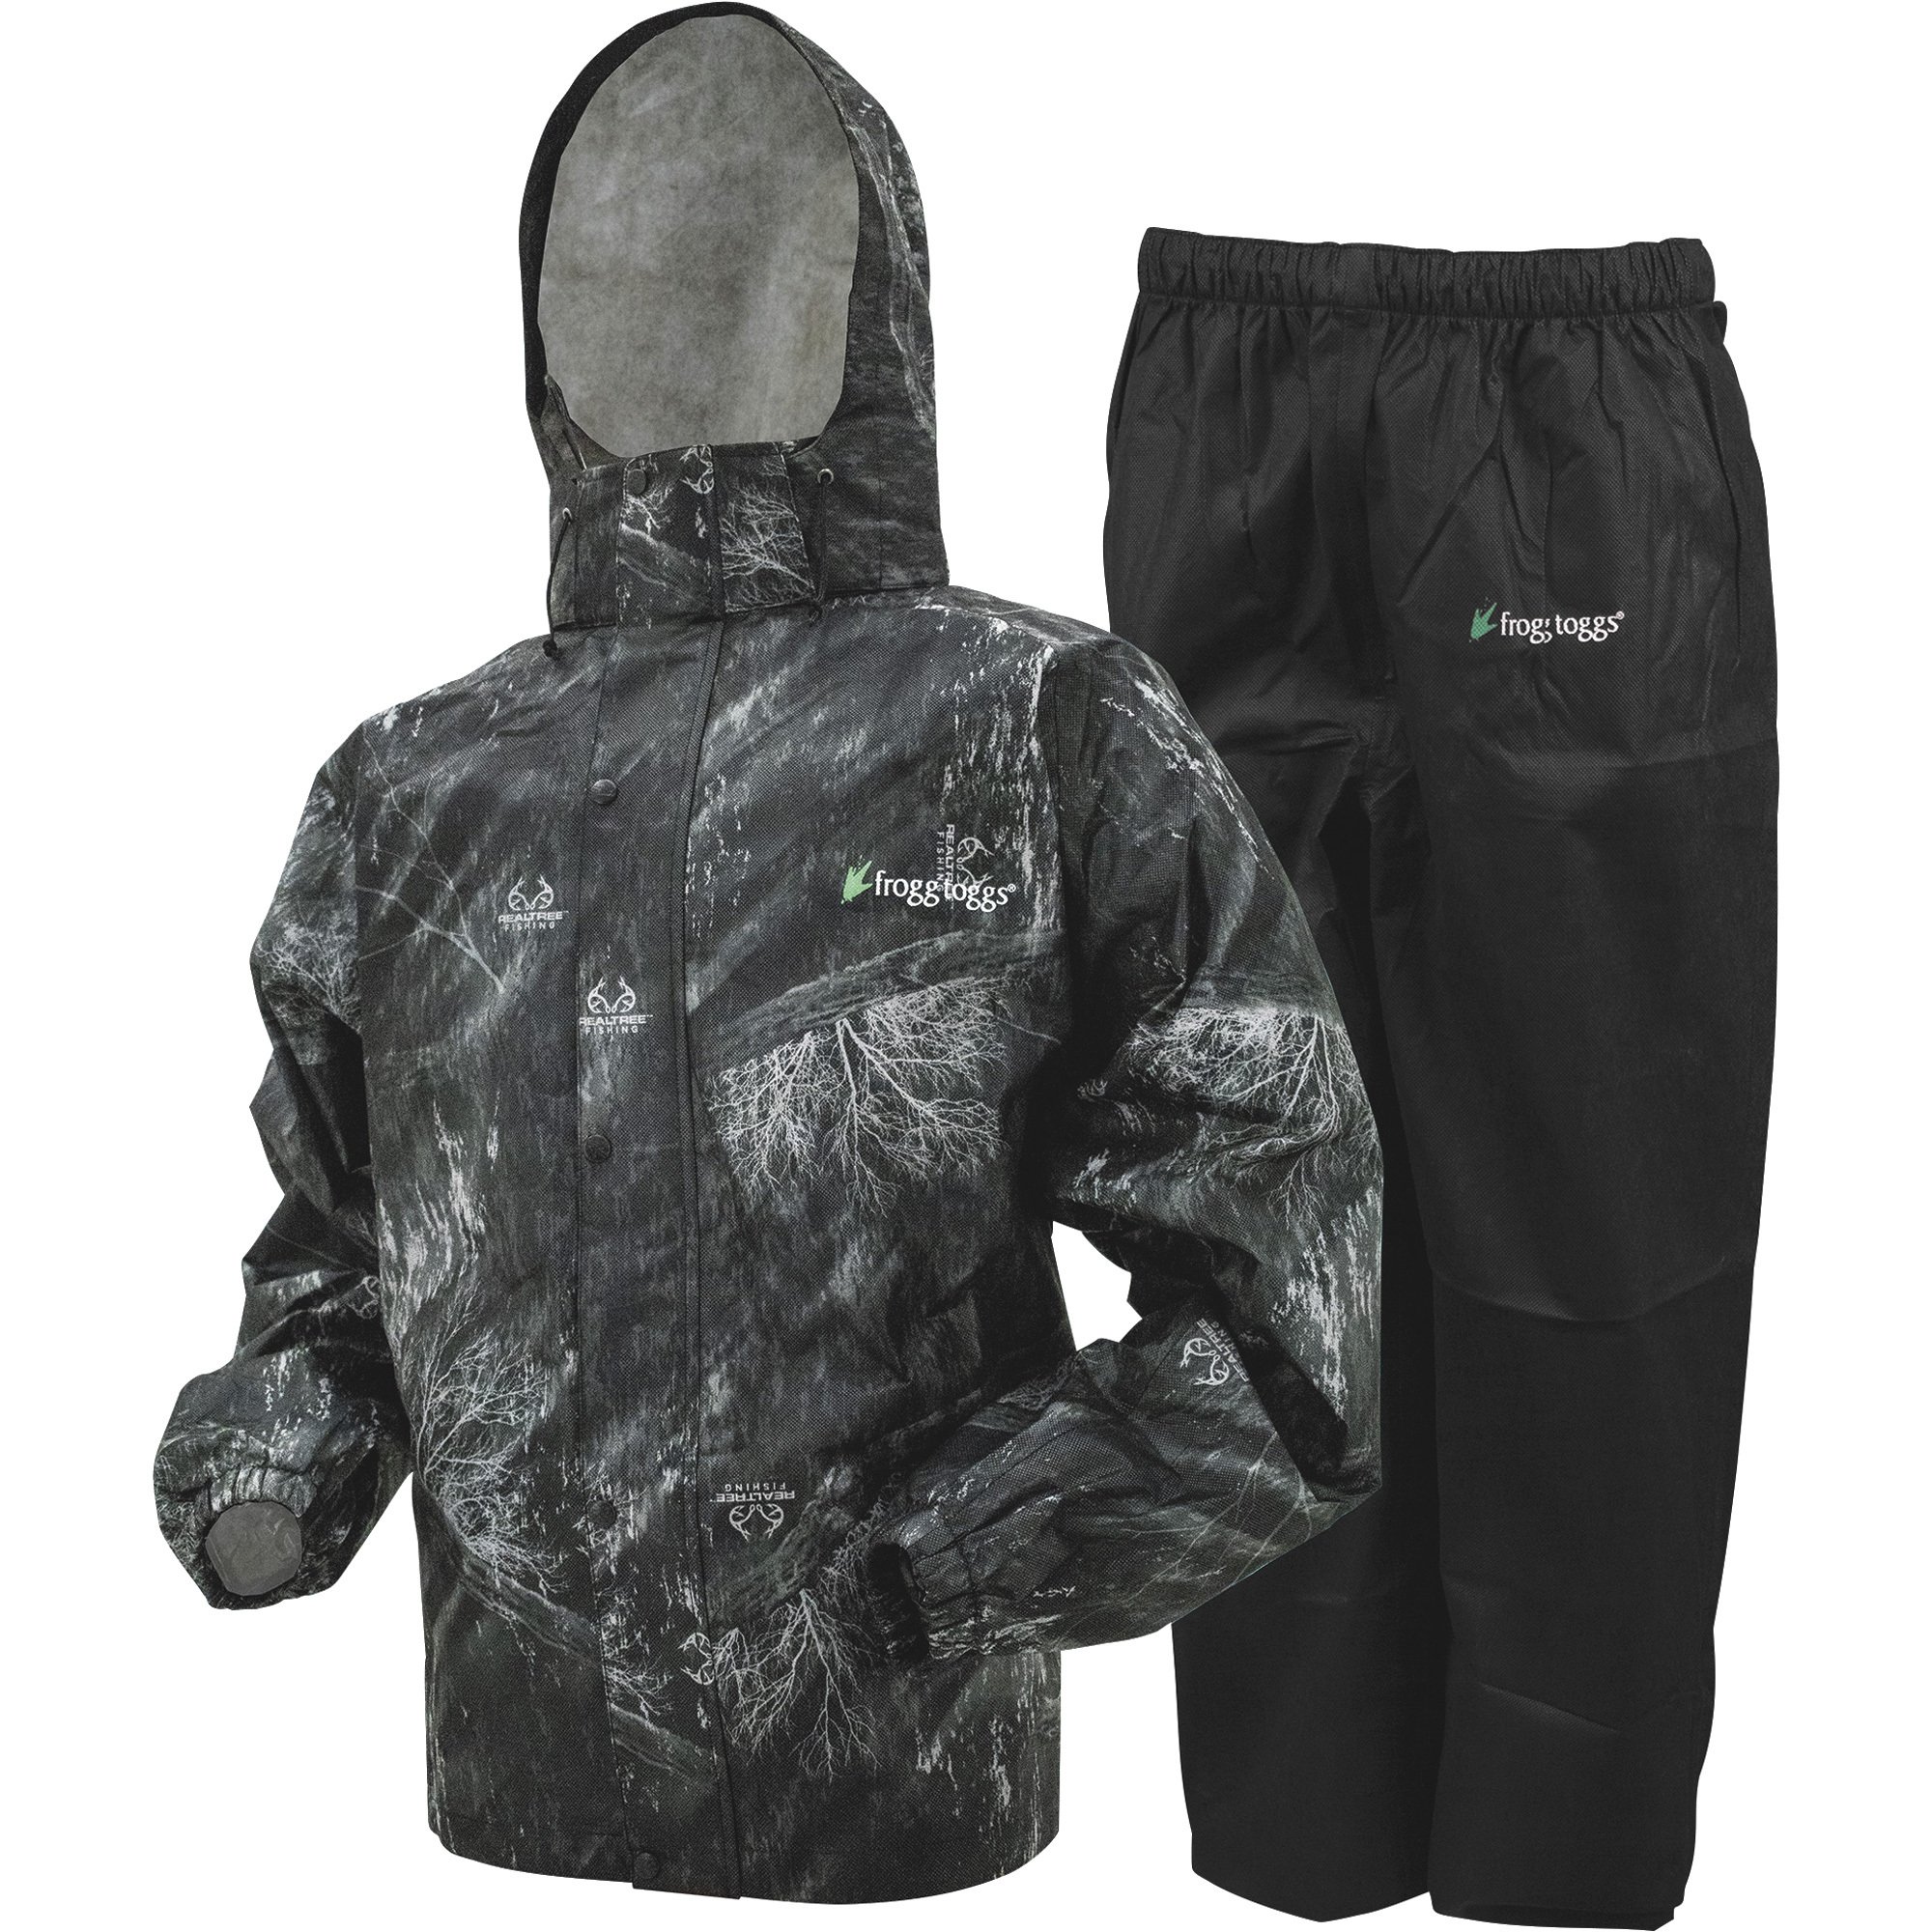 Frogg Toggs Men's All Sports Rain and Wind Jacket and Pants Suit — Realtree  Fishing/Black, Model# AS1310